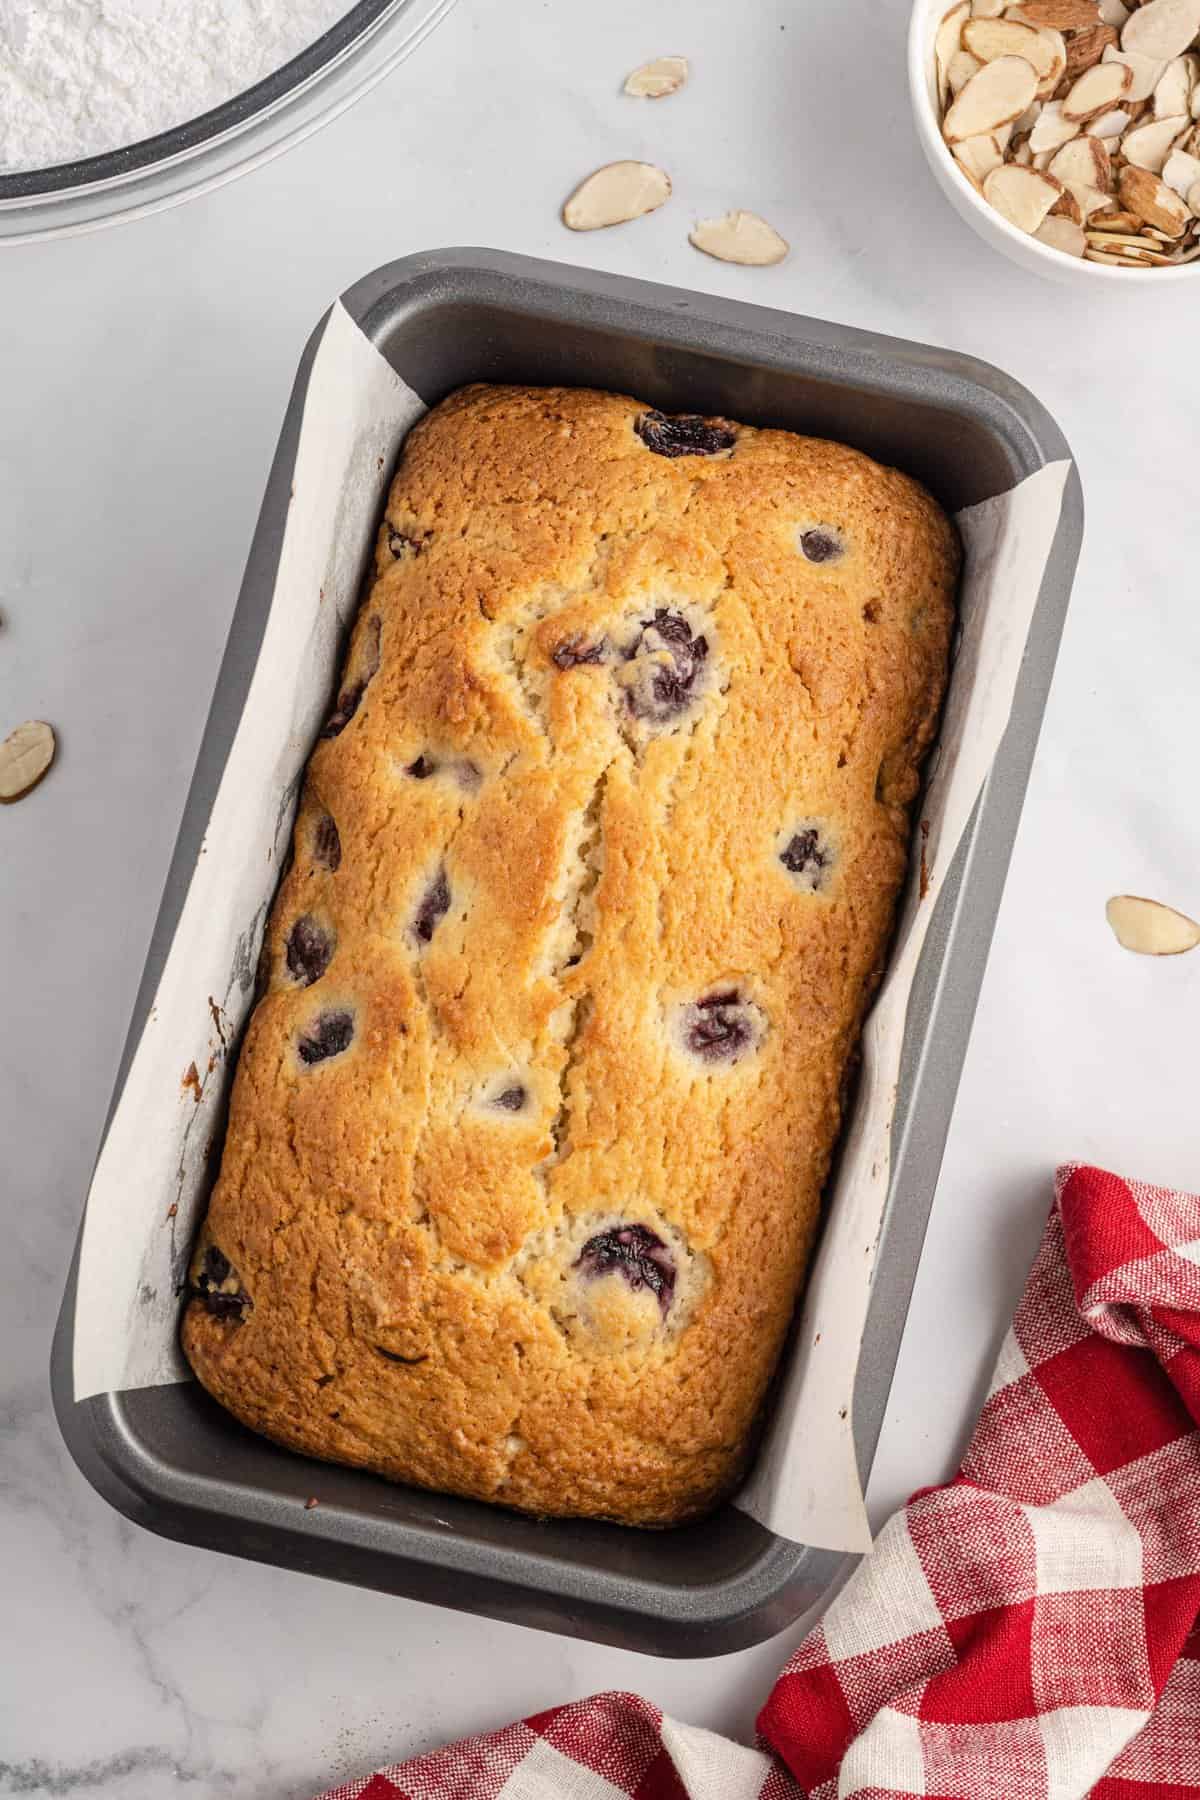 Loaf of cherry bread baked in pan.